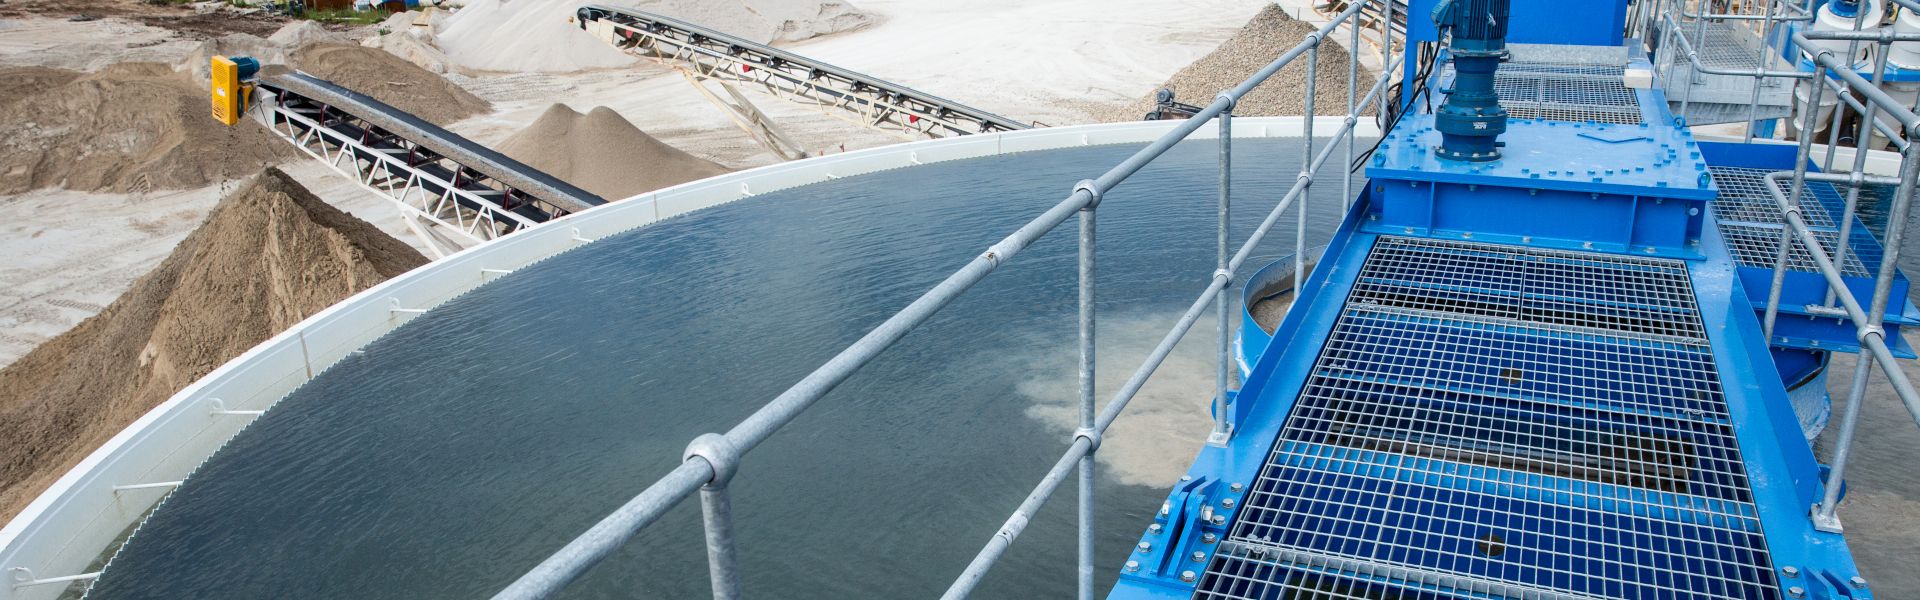 5 Reasons to Invest in a Water Treatment System